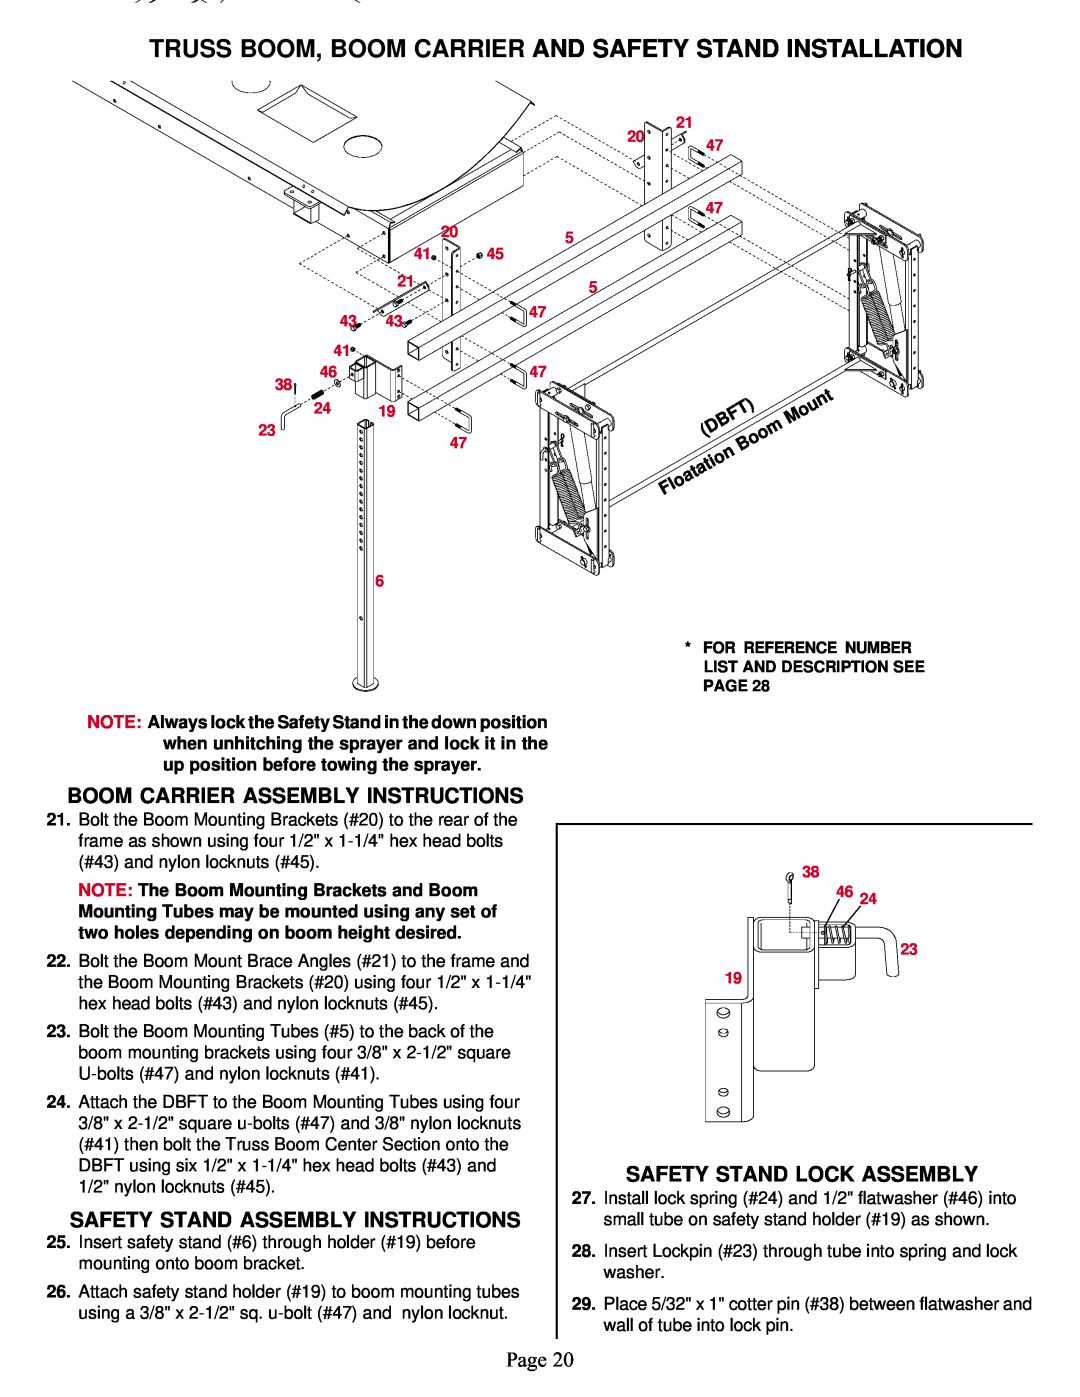 Demco Sprayer manual Truss Boom, Boom Carrier And Safety Stand Installation, Boom Carrier Assembly Instructions, Page 